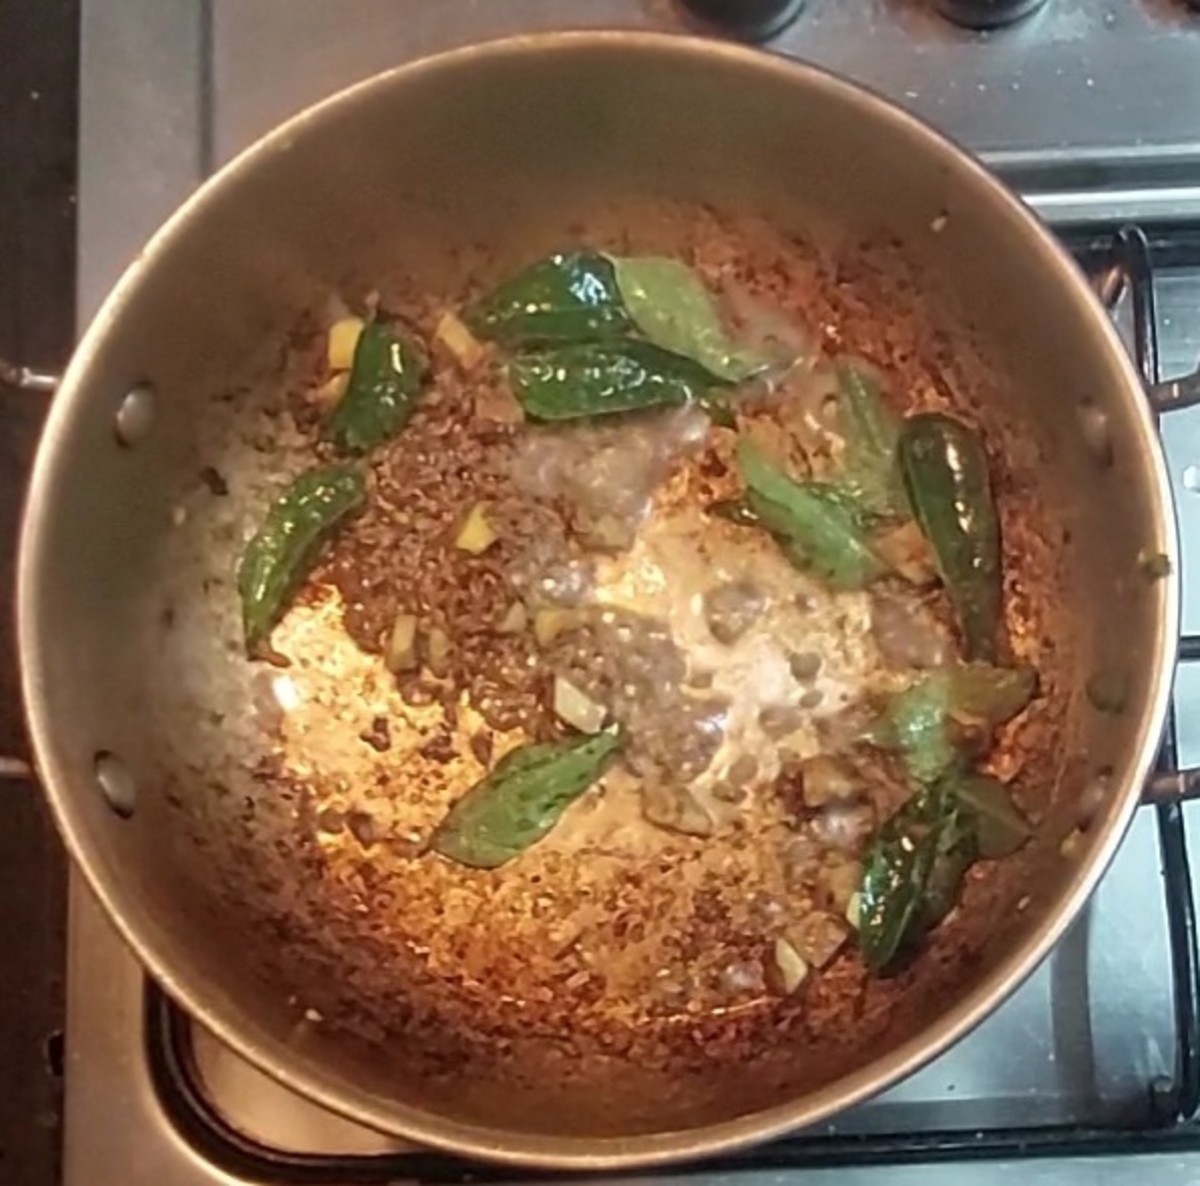 In a same pan, heat 1 teaspoon ghee and 1 teaspoon oil, splutter 1 teaspoon cumin seeds, add a spring of curry leaves, 1 teaspoon chopped ginger, saute for some seconds.